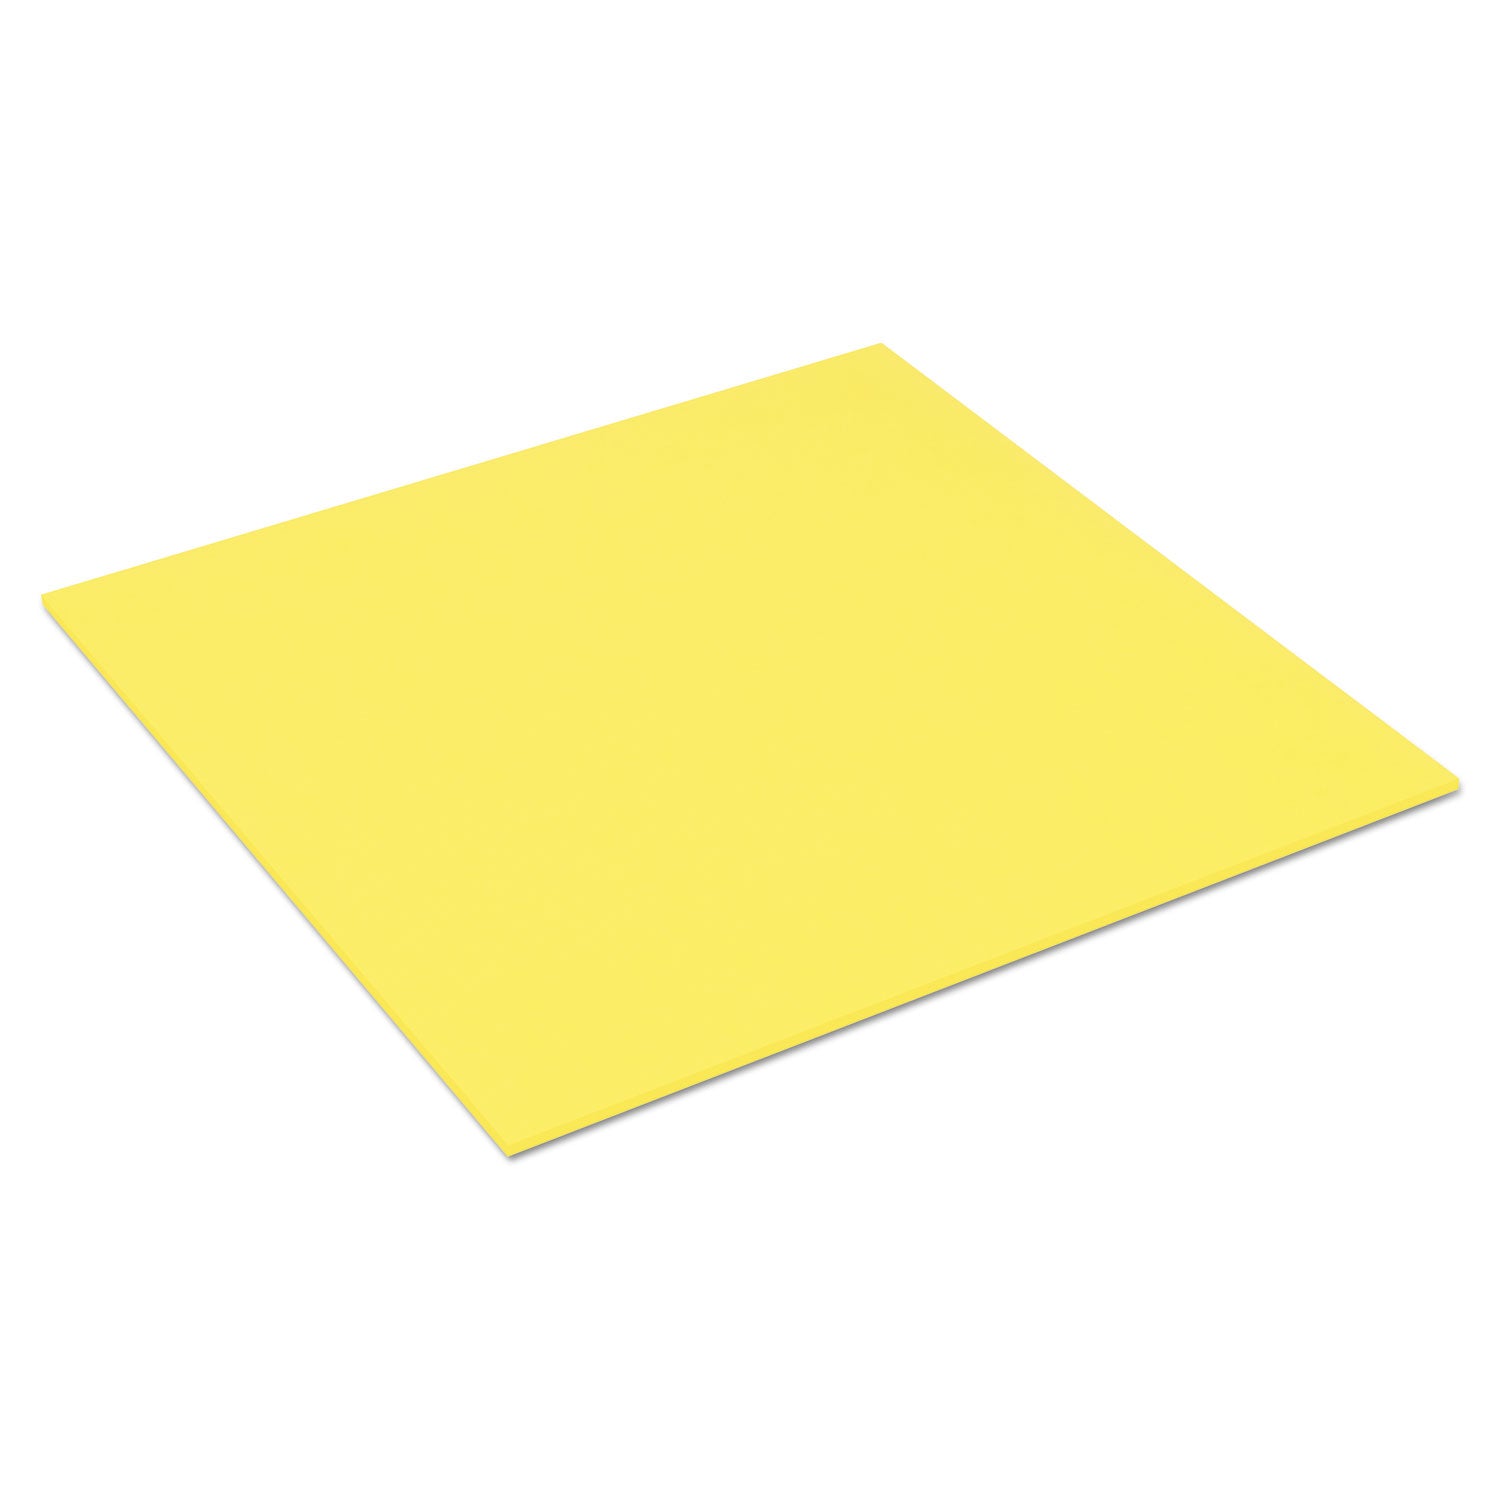 big-notes-unruled-11-x-11-yellow-30-sheets_mmmbn11 - 4